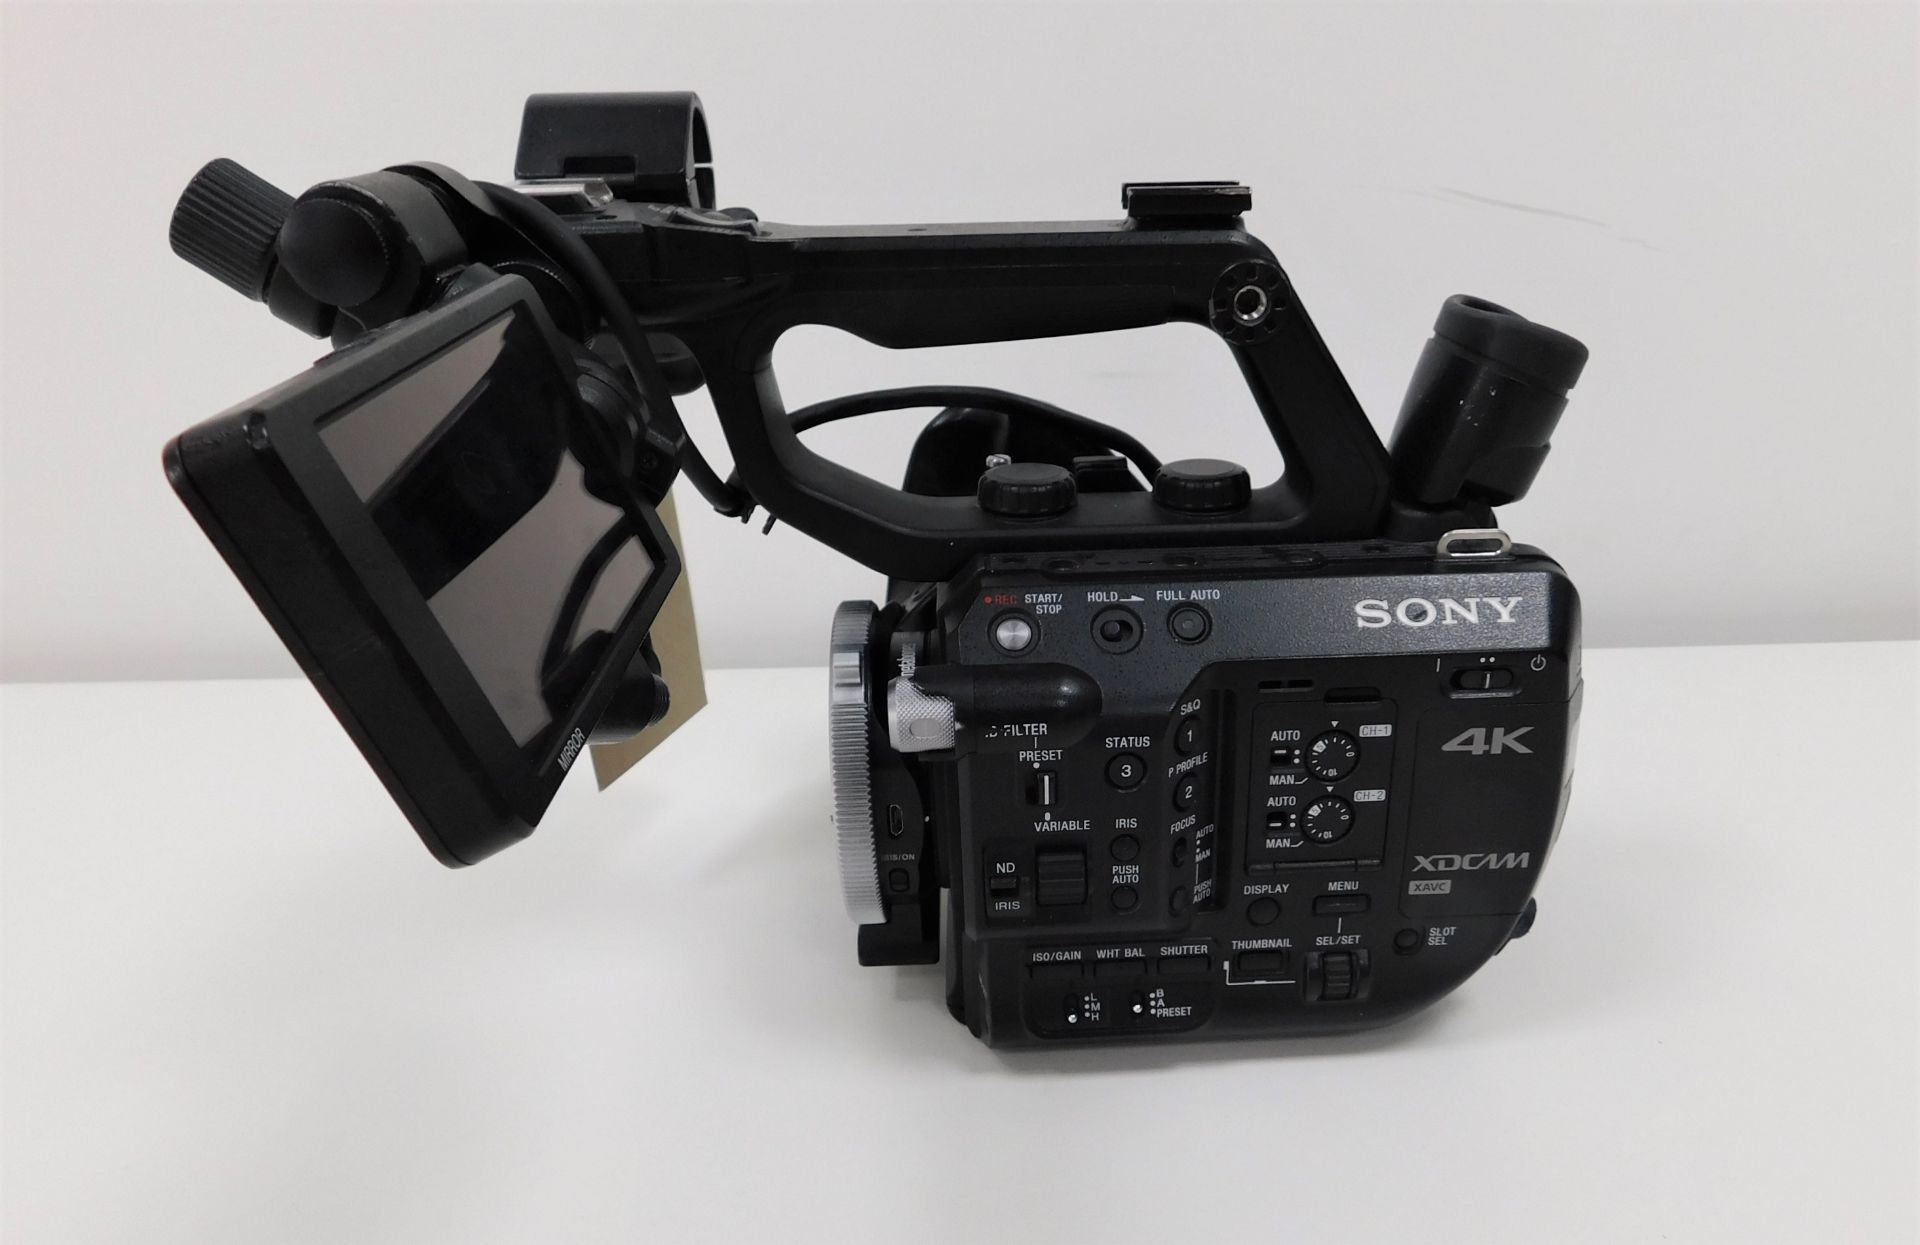 Sony PXW-FS5 Solid State Memory Camcorder Body with Battery and Charger, Serial Number 1610134 ( - Image 2 of 4